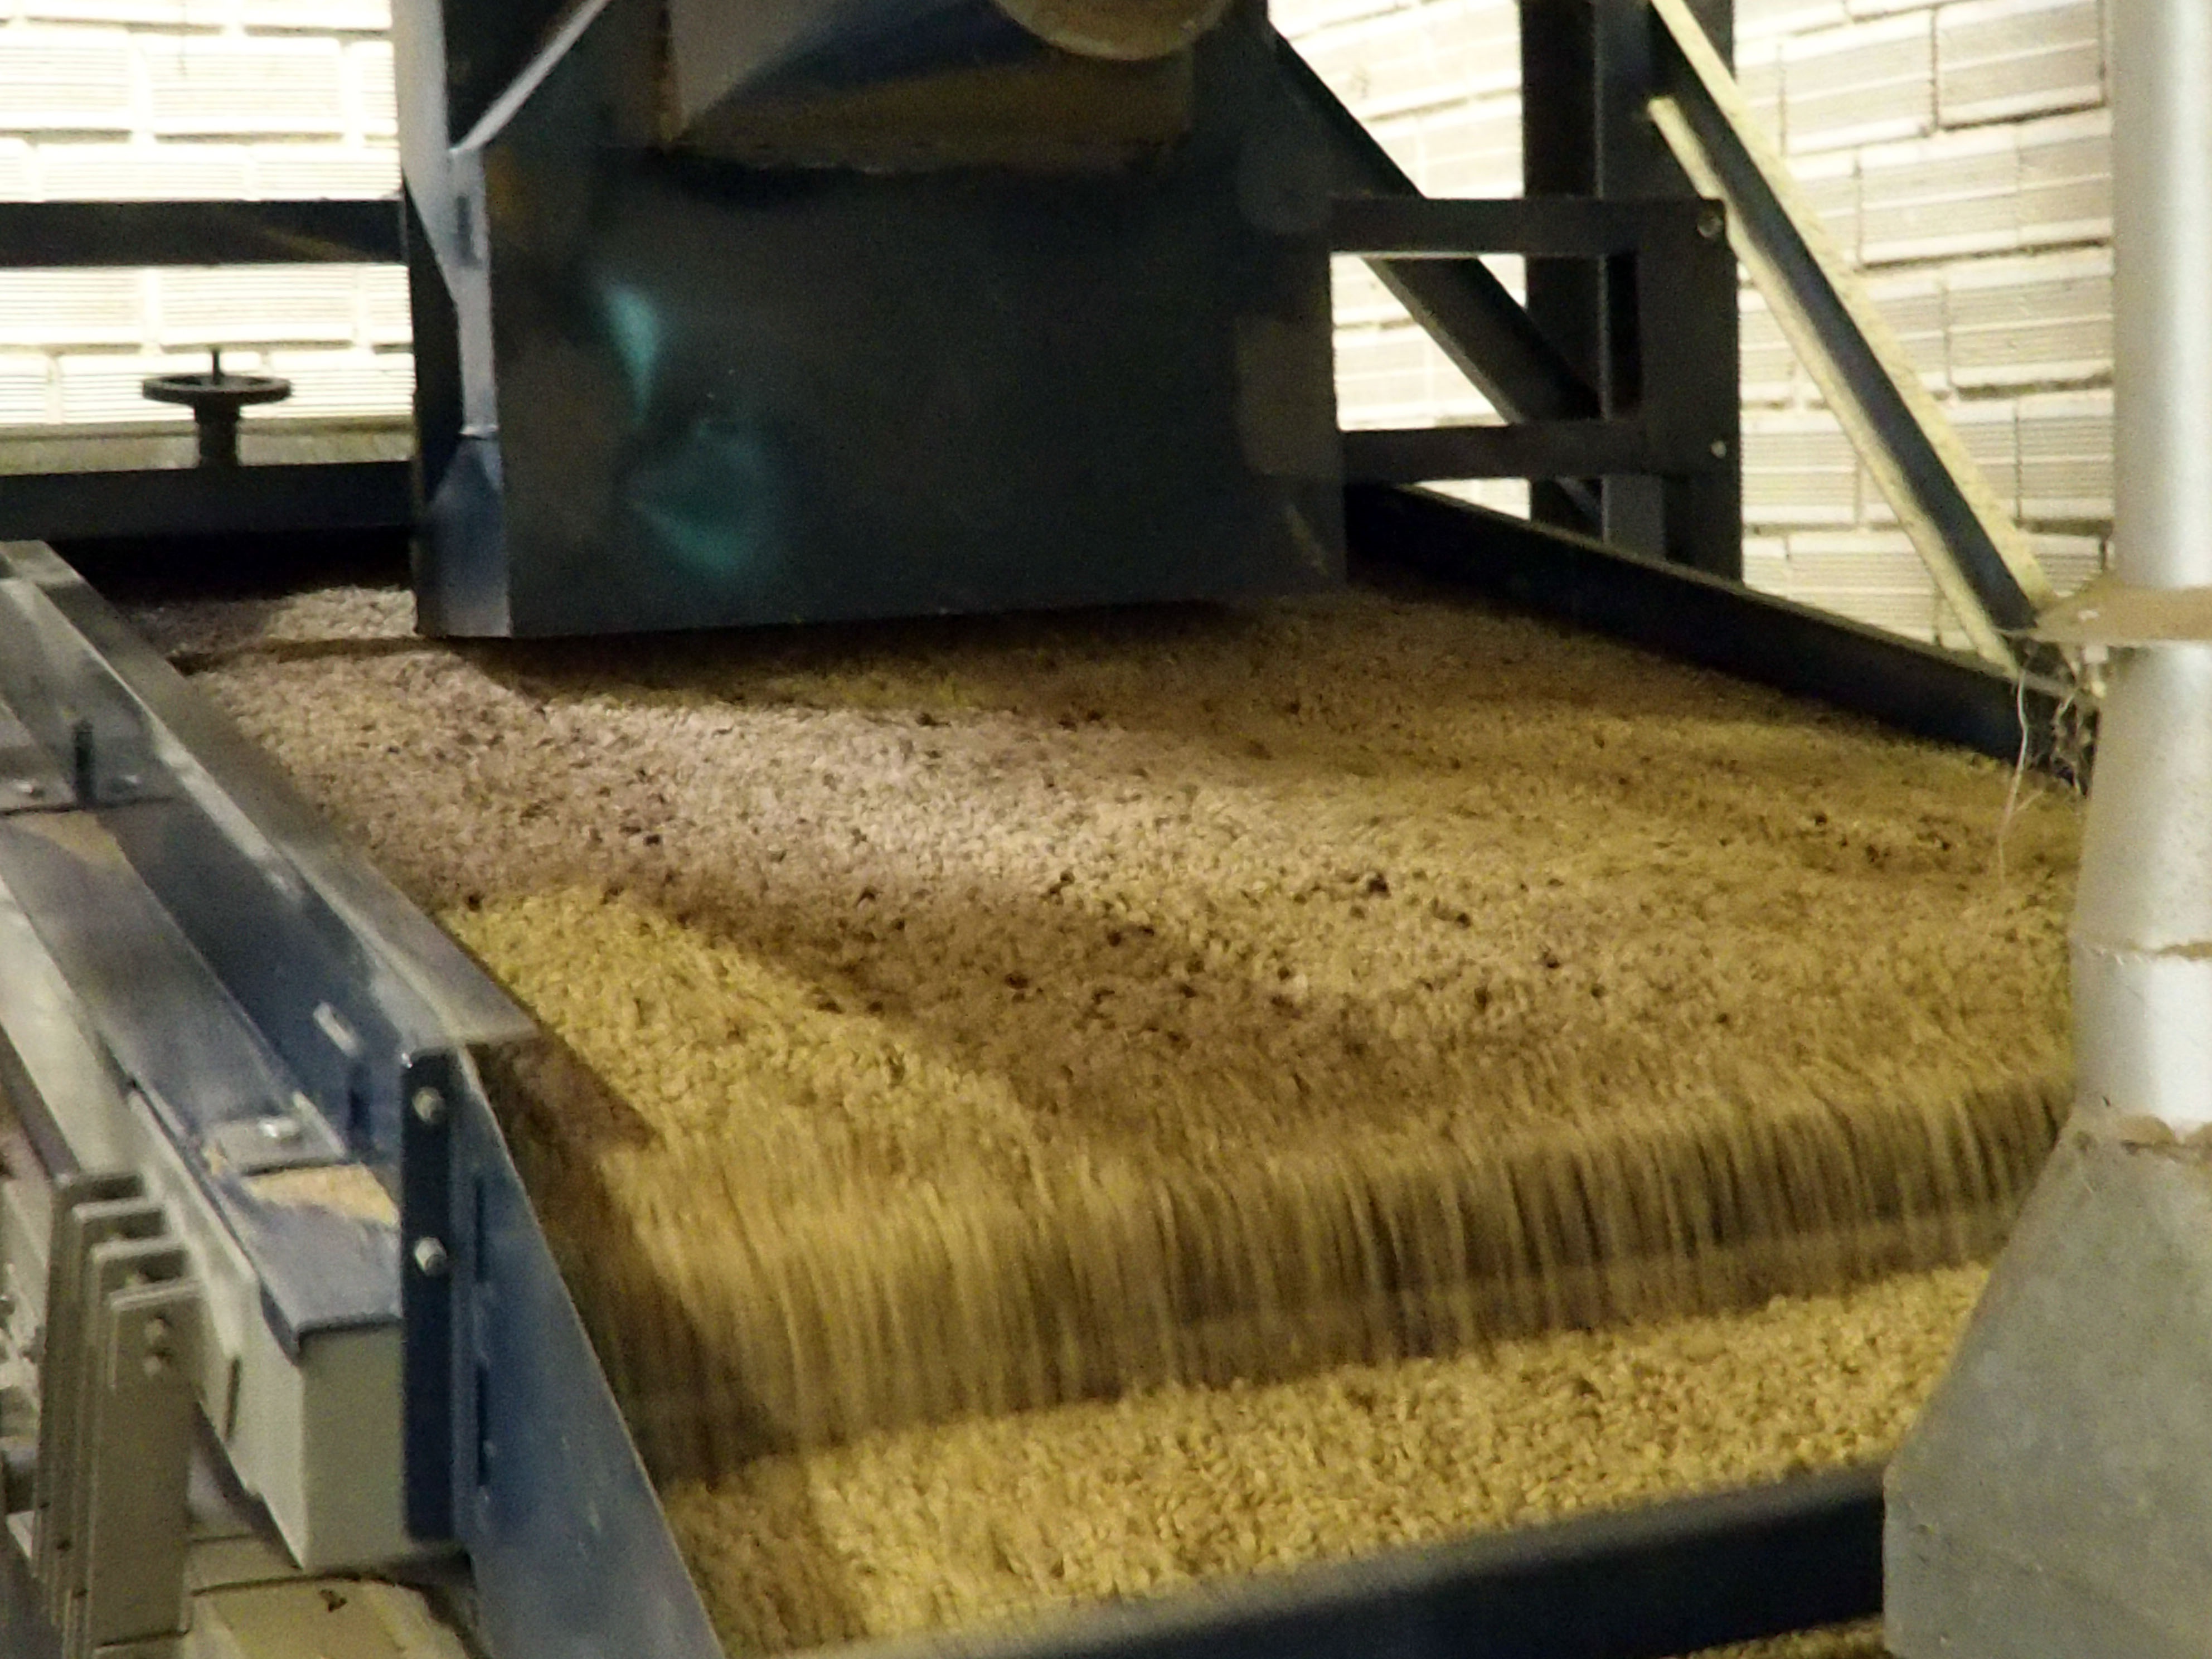 Processing coffee beans